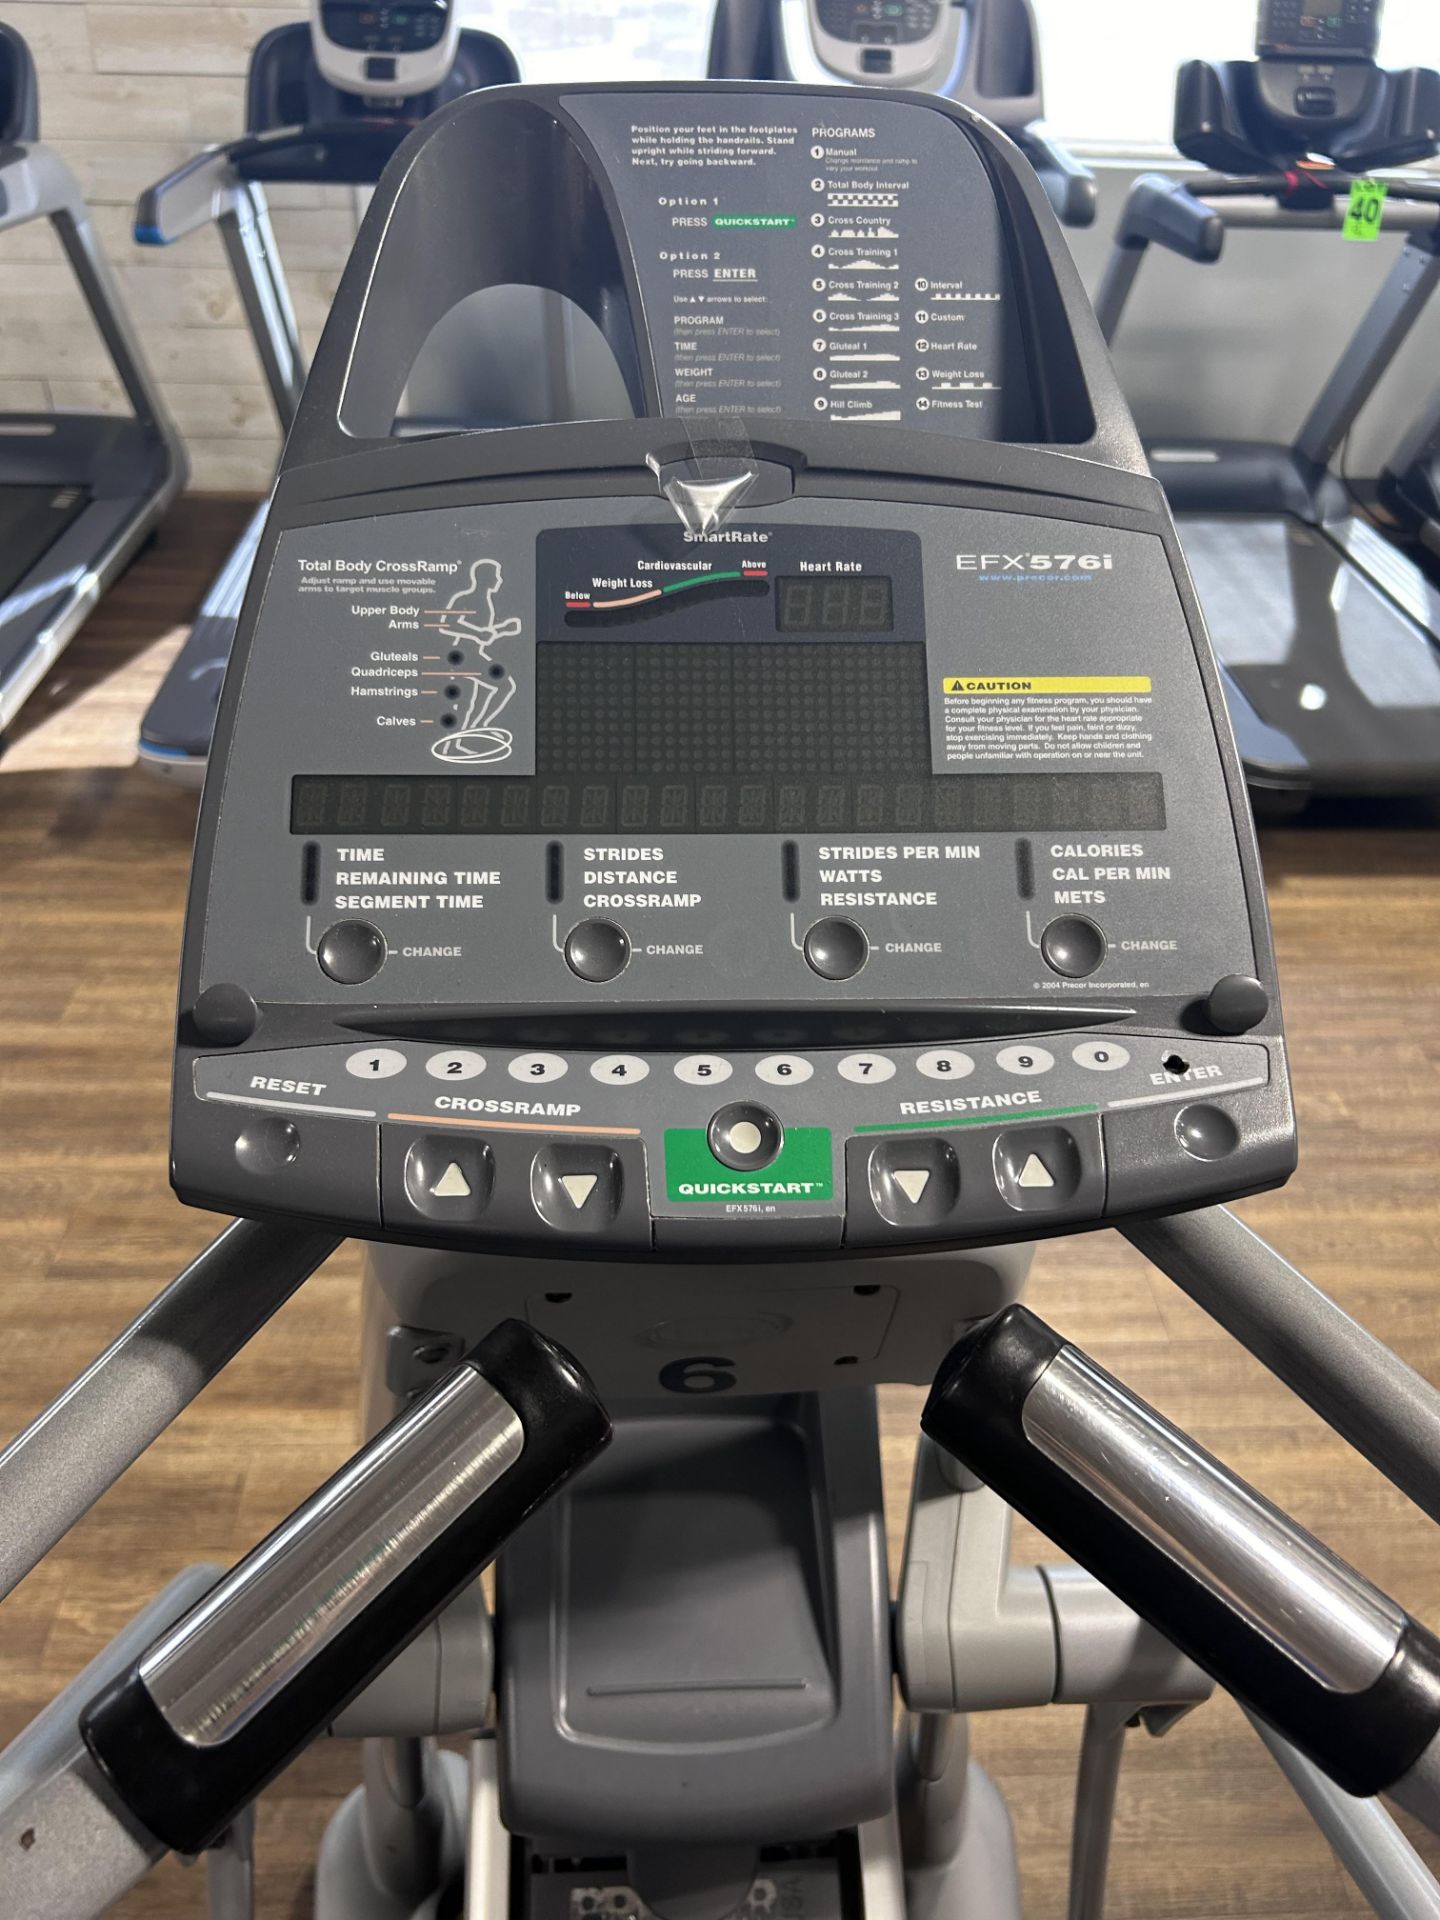 PRECOR mod. EFX576i Elliptical Cross-Trainer, Premium Commercial Series - See Notes - Image 4 of 7